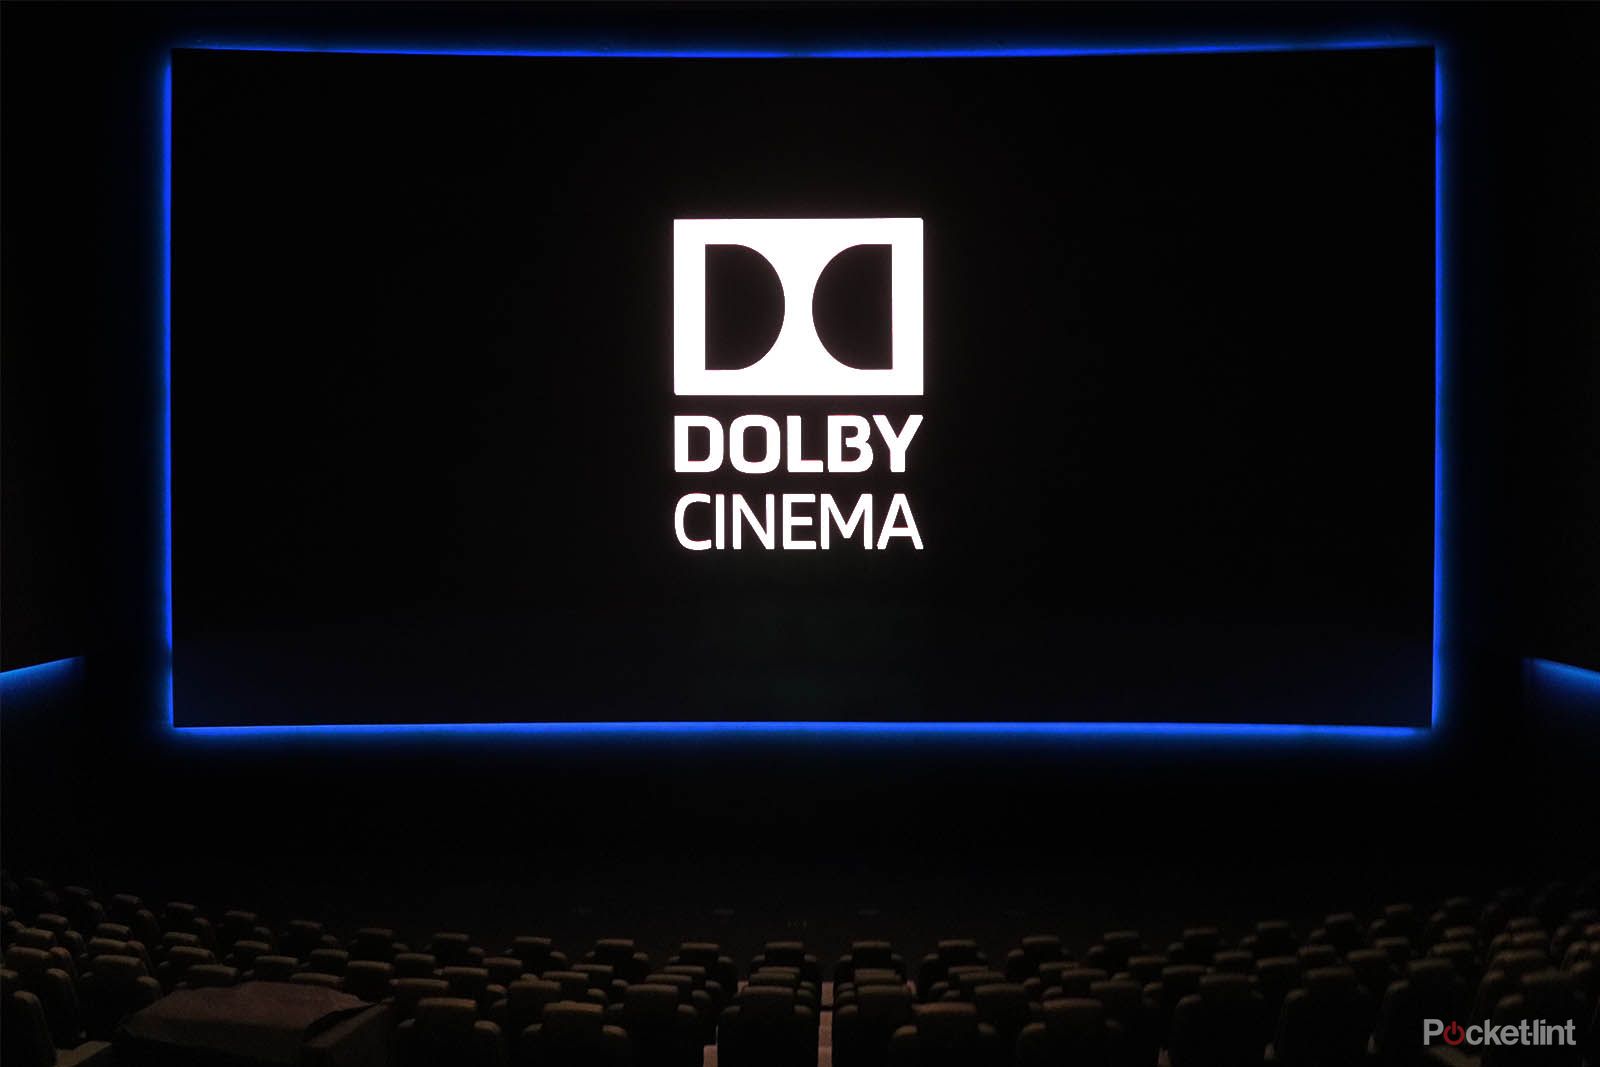 The UKs second Dolby Cinema is set to open soon in image 1